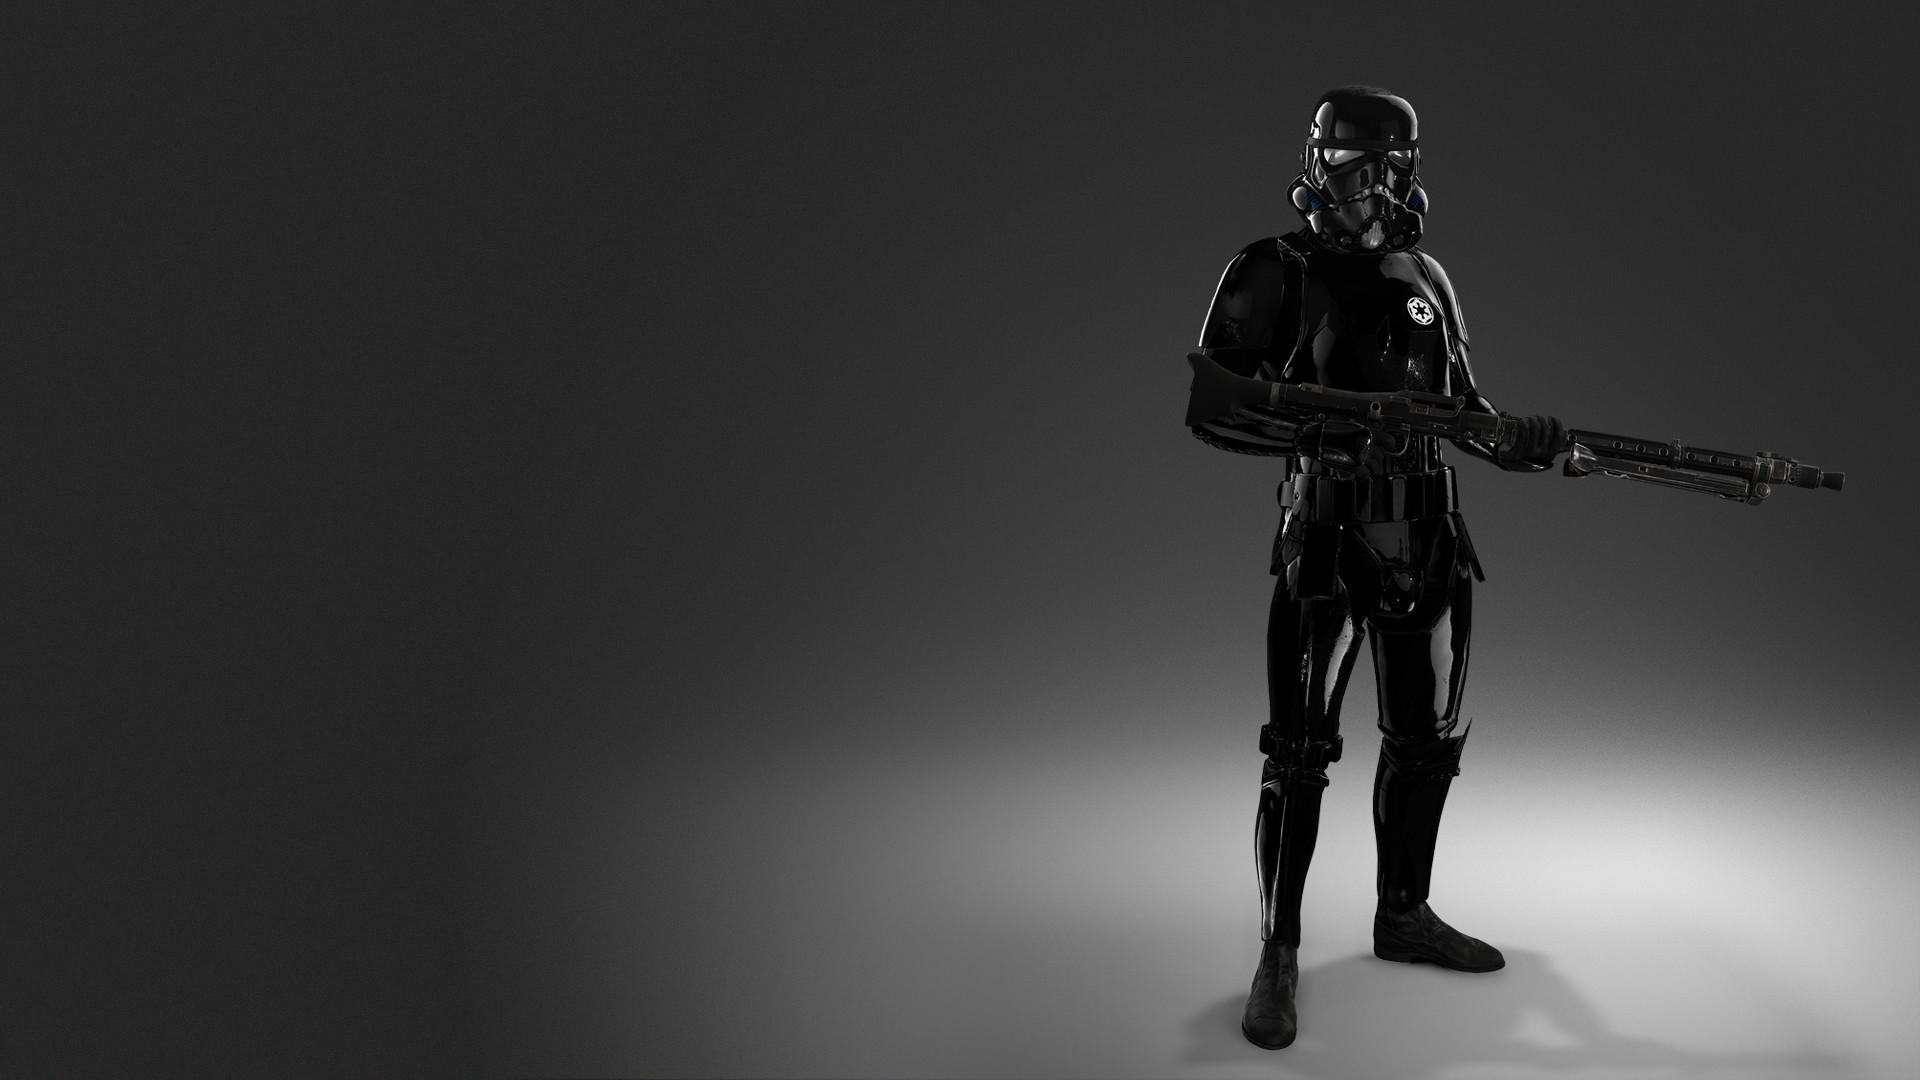 Free download Shadow Trooper confirmed as appearance option StarWarsBattlefront [1920x1080] for your Desktop, Mobile & Tablet. Explore Shadow Trooper Wallpaper. Clone Trooper Wallpaper, Star Wars Scout Trooper Wallpaper, SWTOR HD Wallpaper